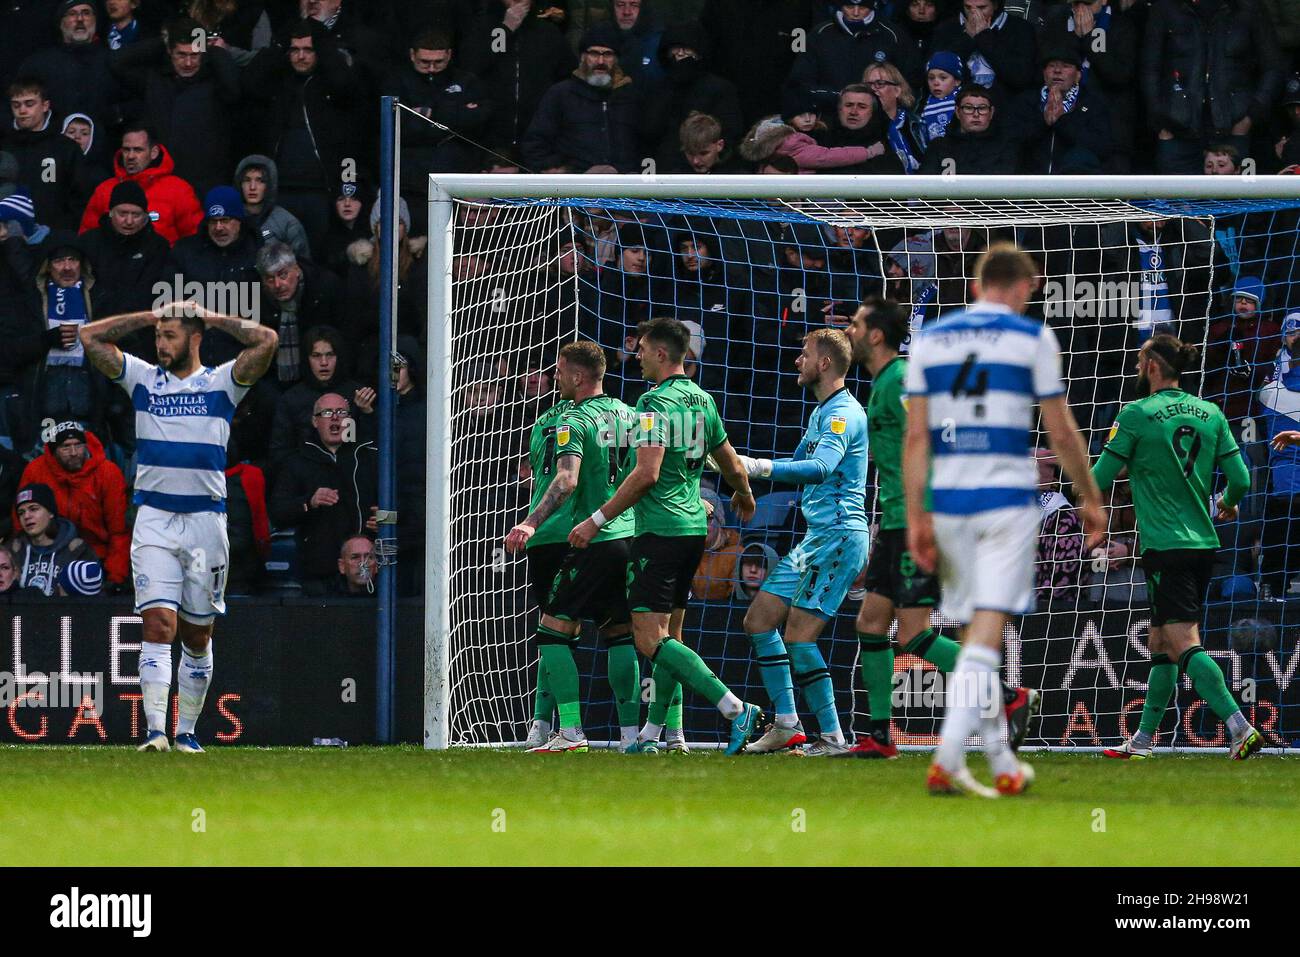 Queens Park Rangers' Charlie Austin (left) shows his disappointment after Stoke City goalkeeper Adam Davies saves his penalty during the Sky Bet Championship match at the Kiyan Prince Foundation Stadium, London. Picture date: Sunday December 5, 2021. Stock Photo